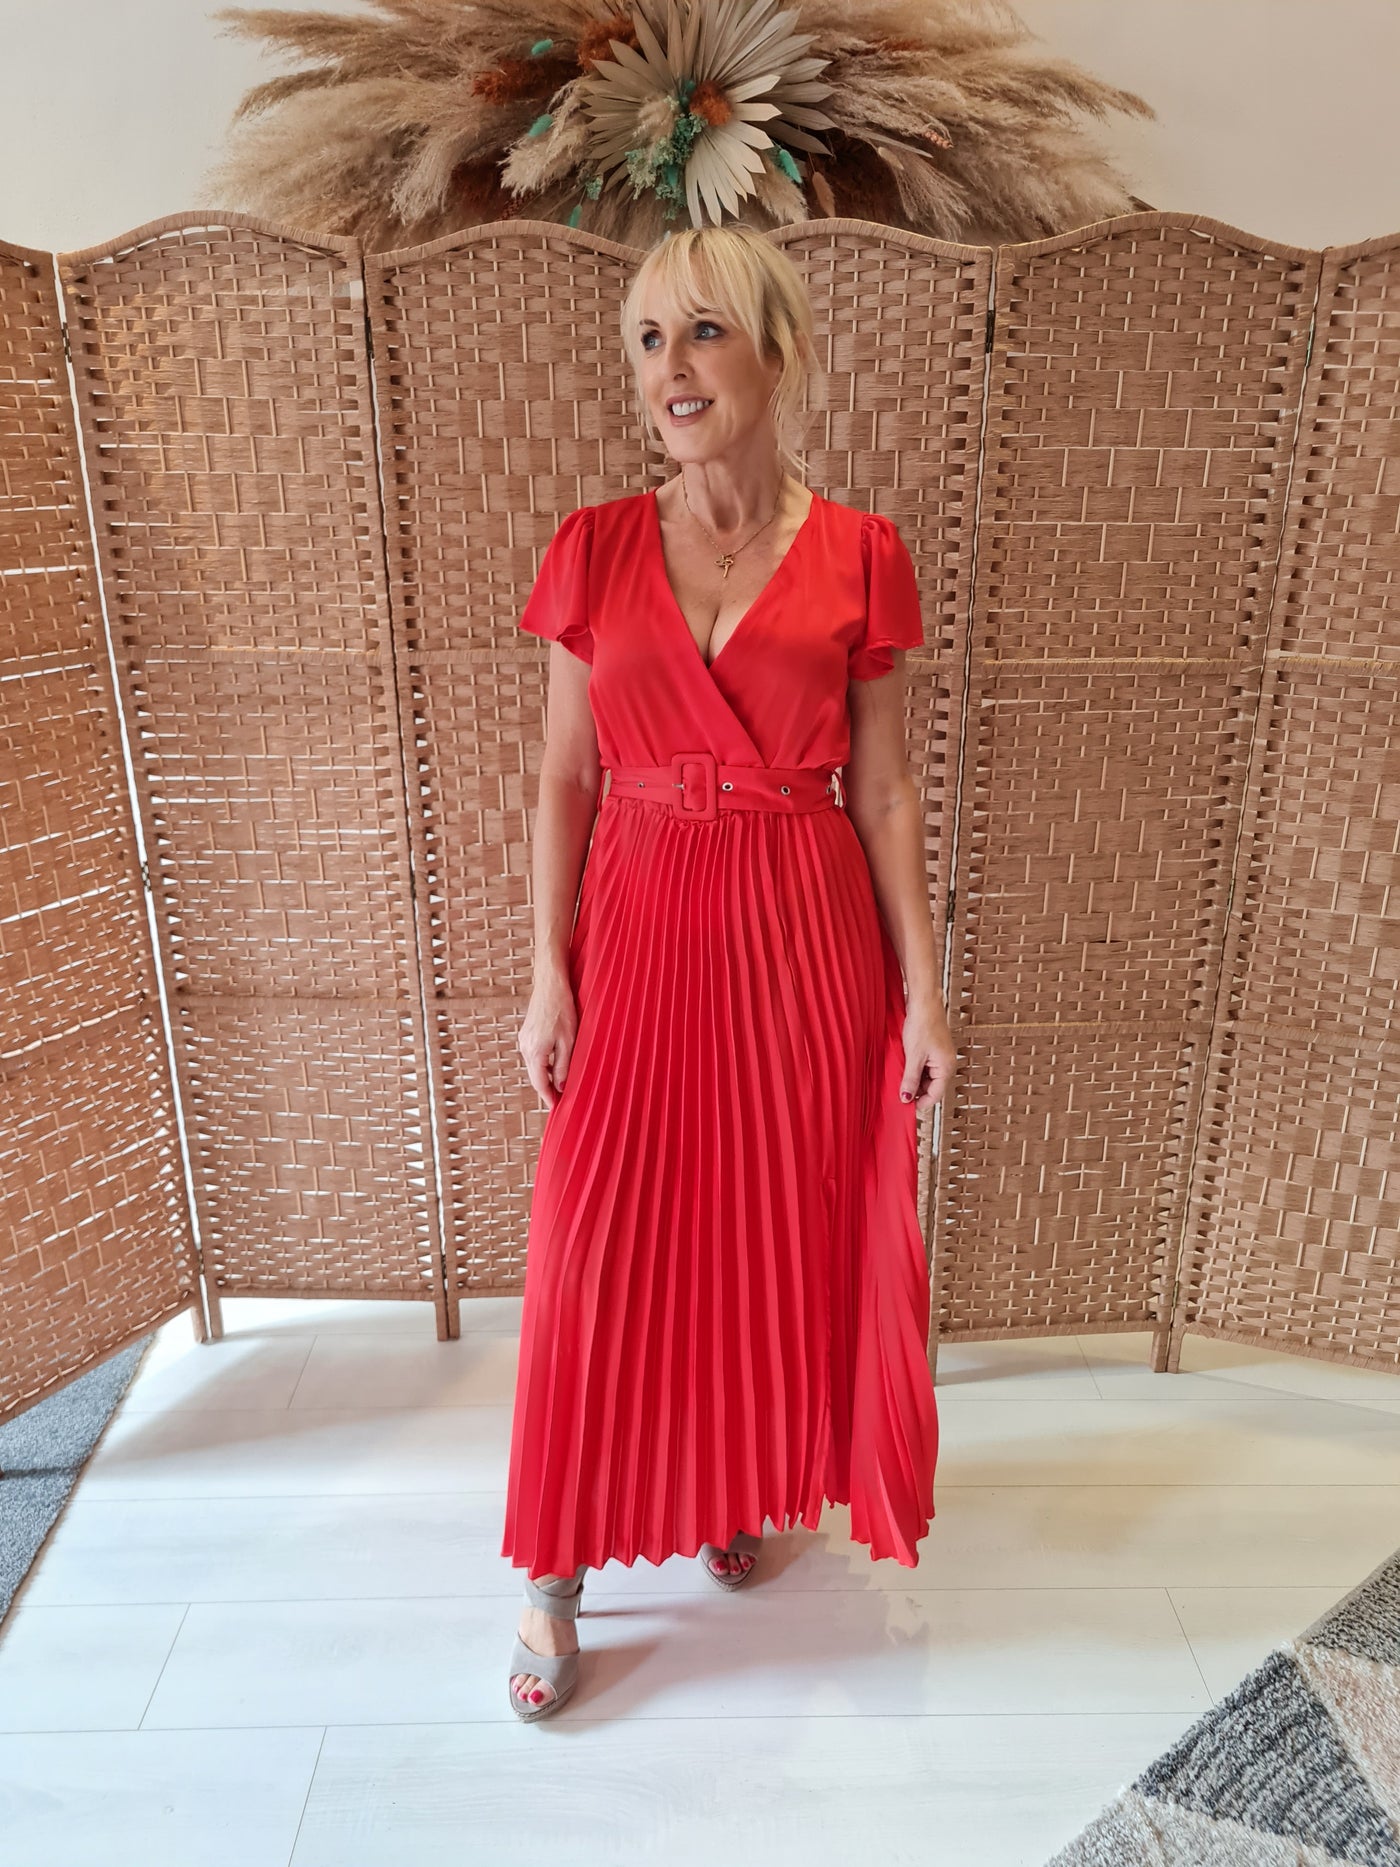 New Look Red Pleat Dress 8 NEW RRP £28